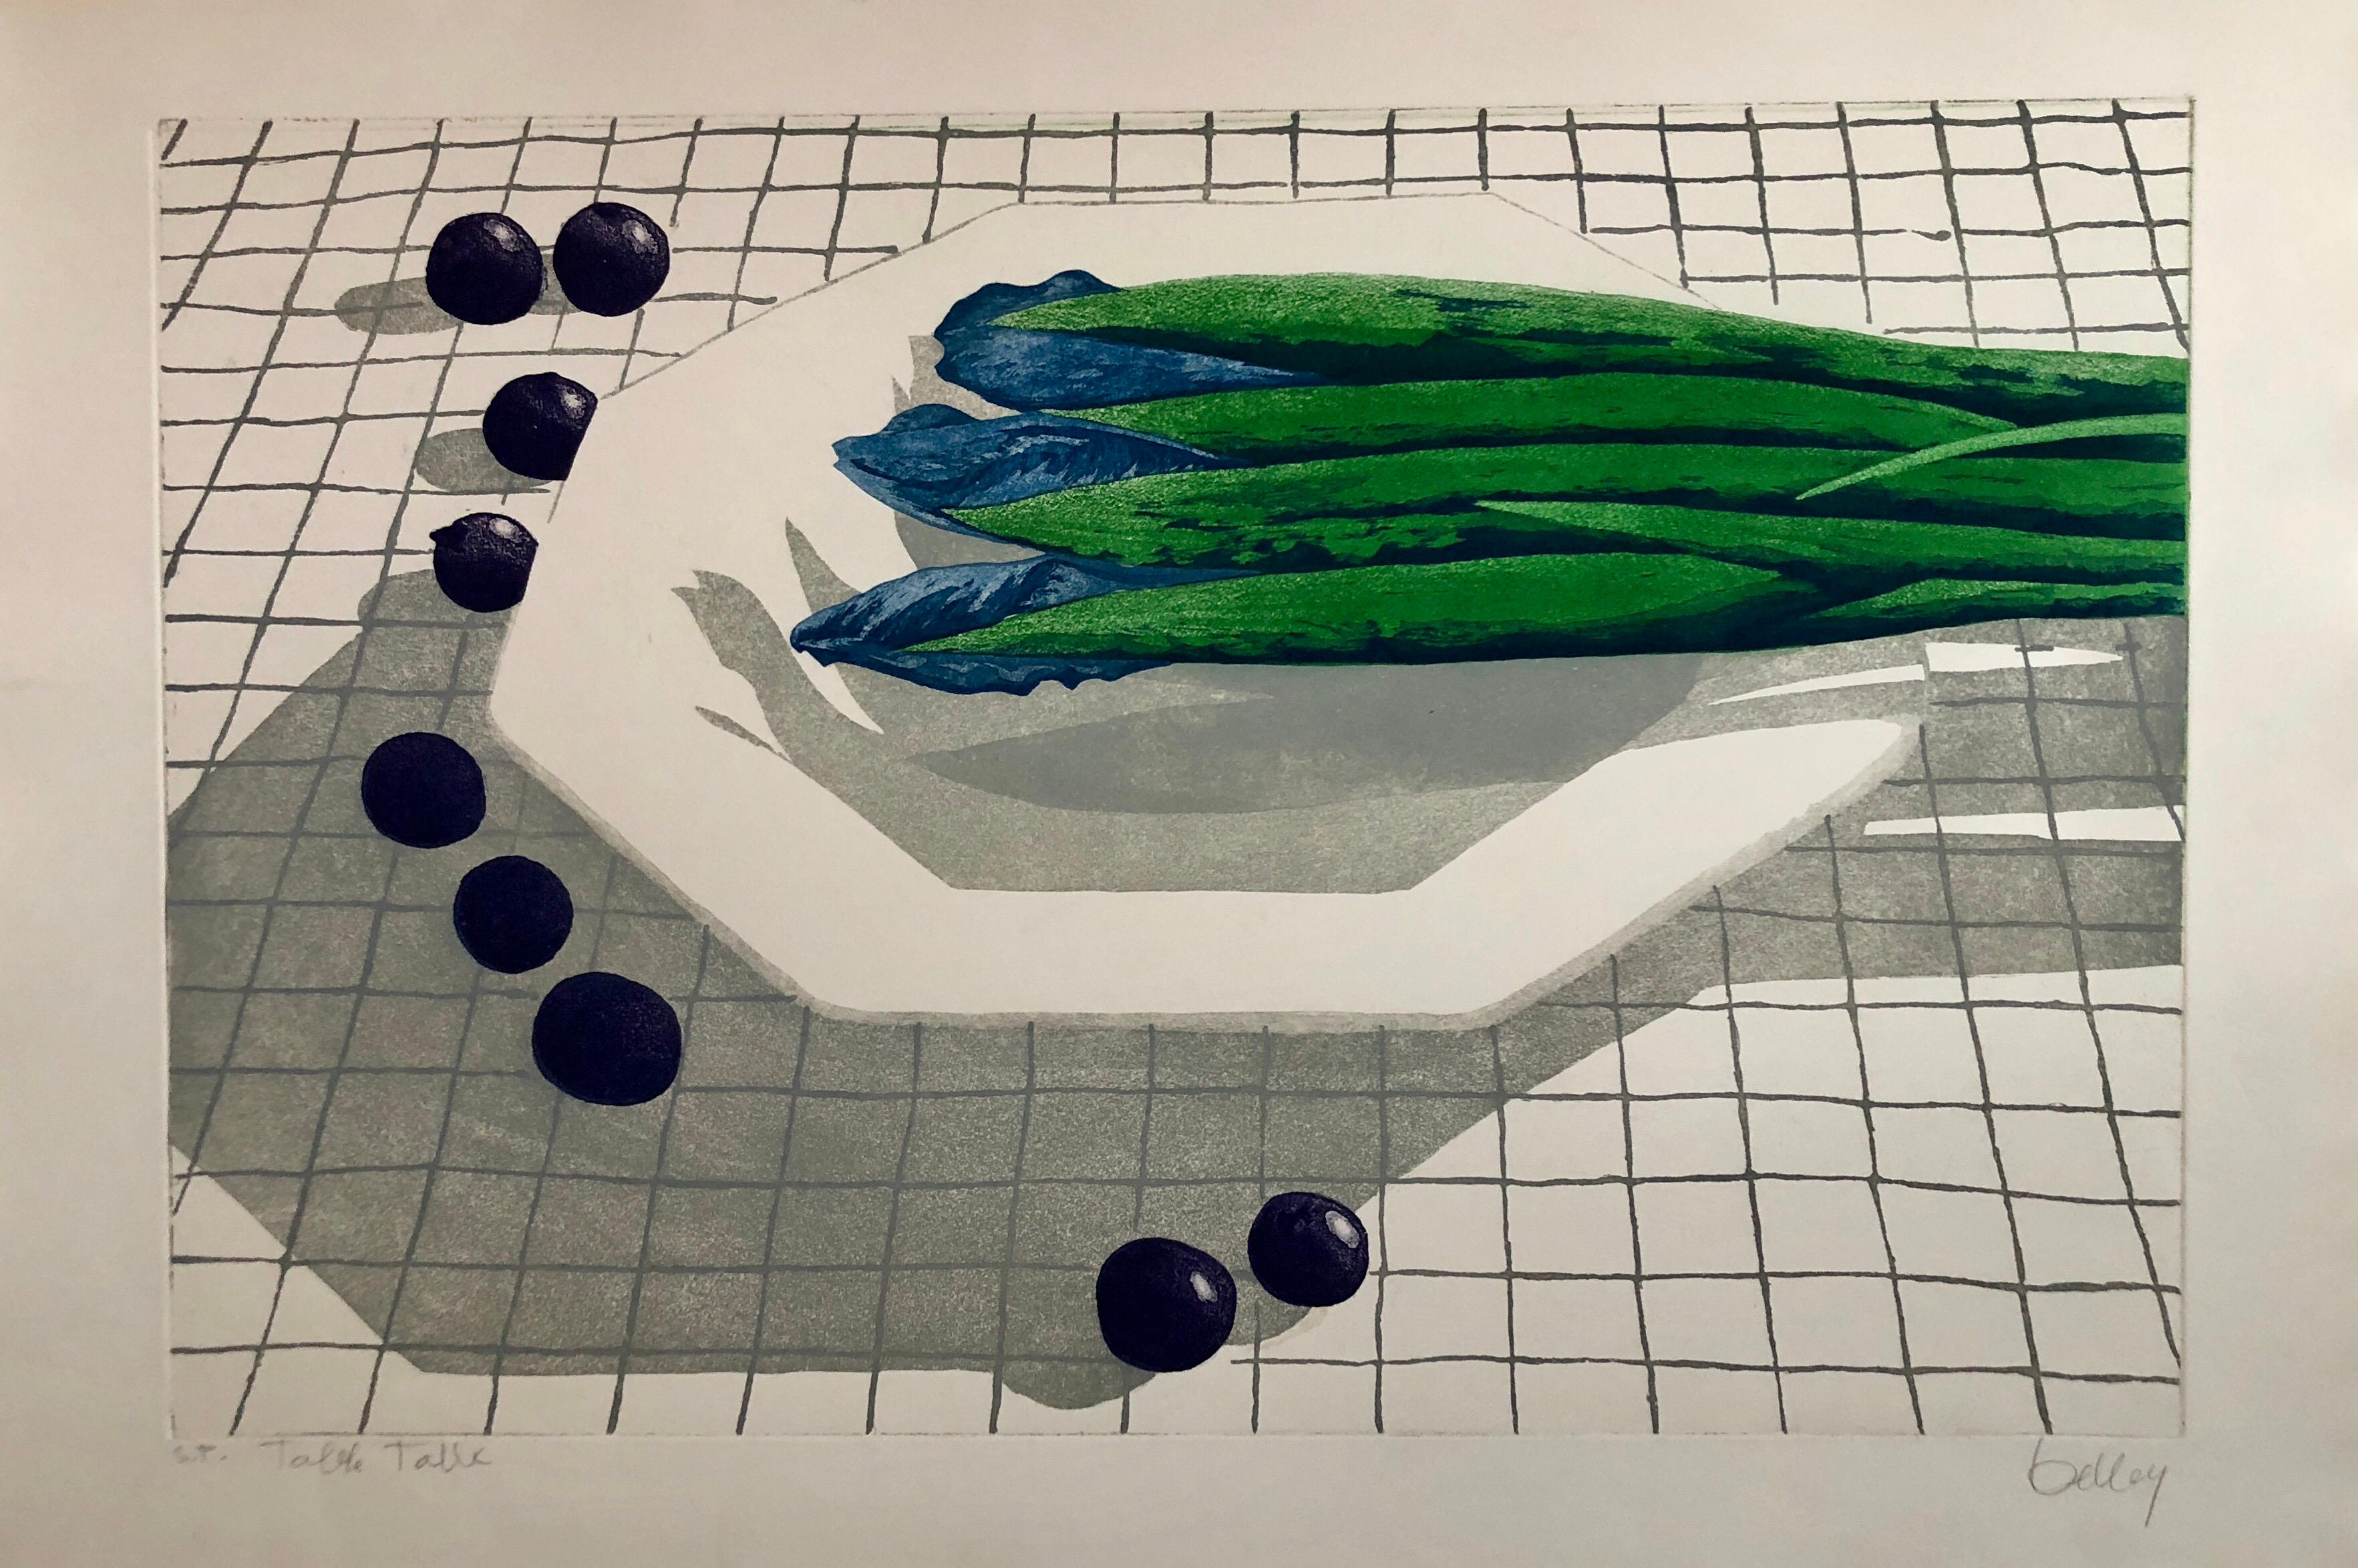 Brian Kelley Interior Print - Large Lithograph Still Life "Table Talk" Asparagus and Blueberries on Tablecloth